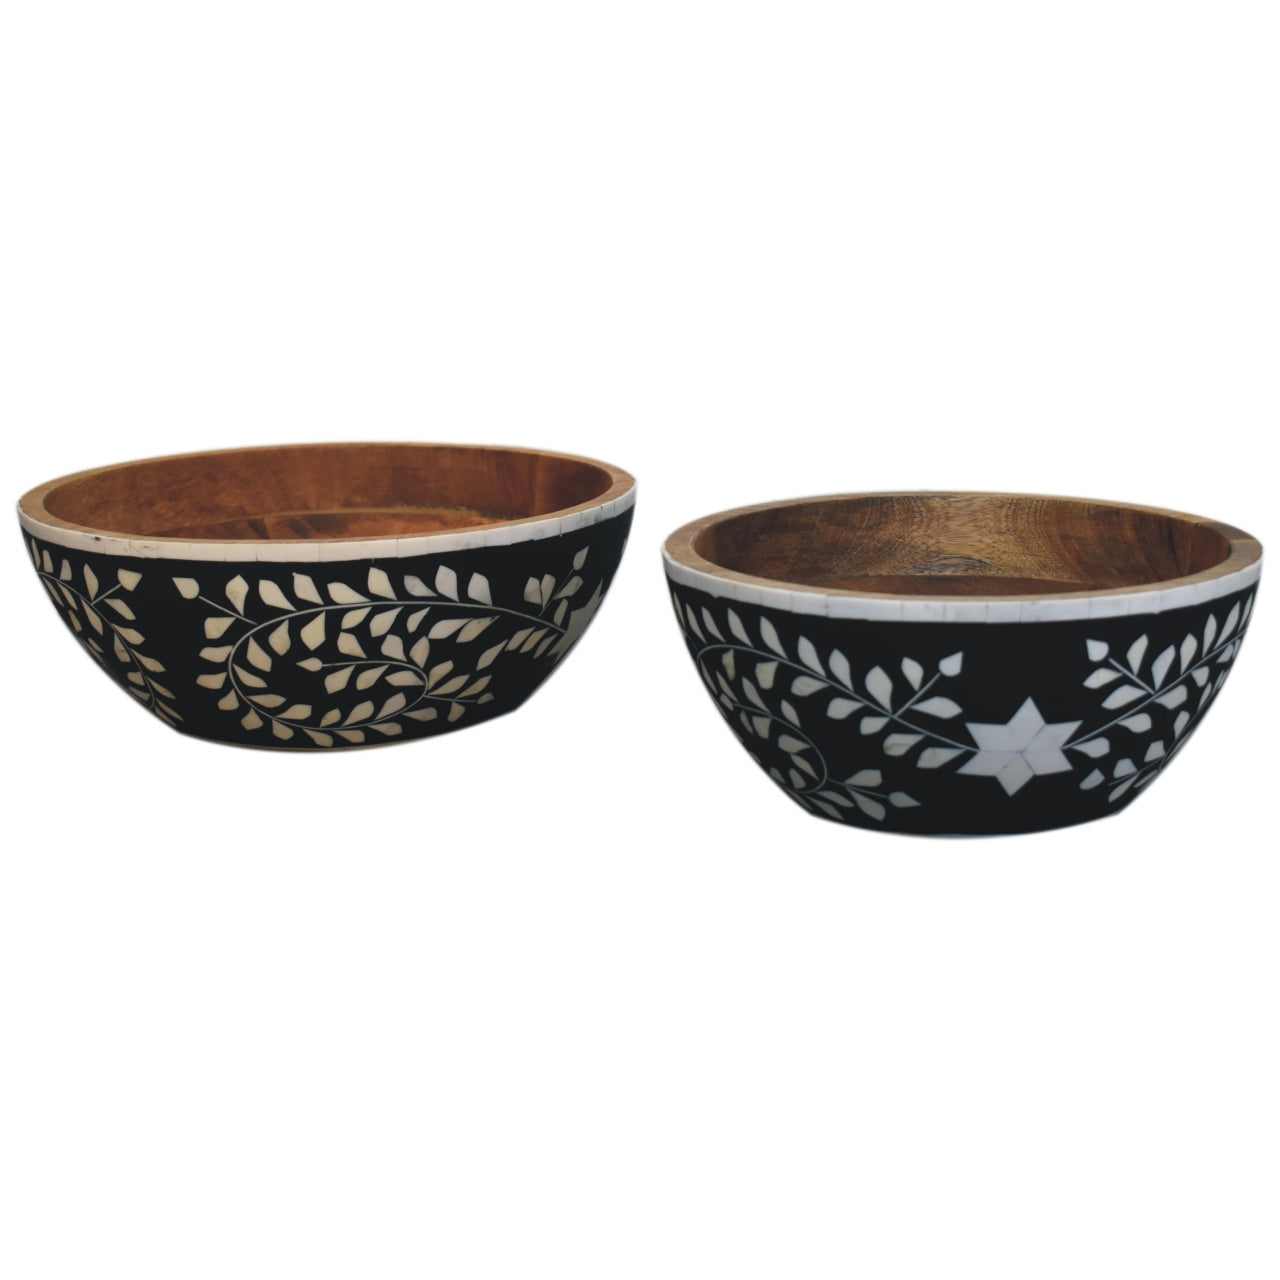 View Floral Bowl with Resin Inlay in Mango Wood Set of 2 information